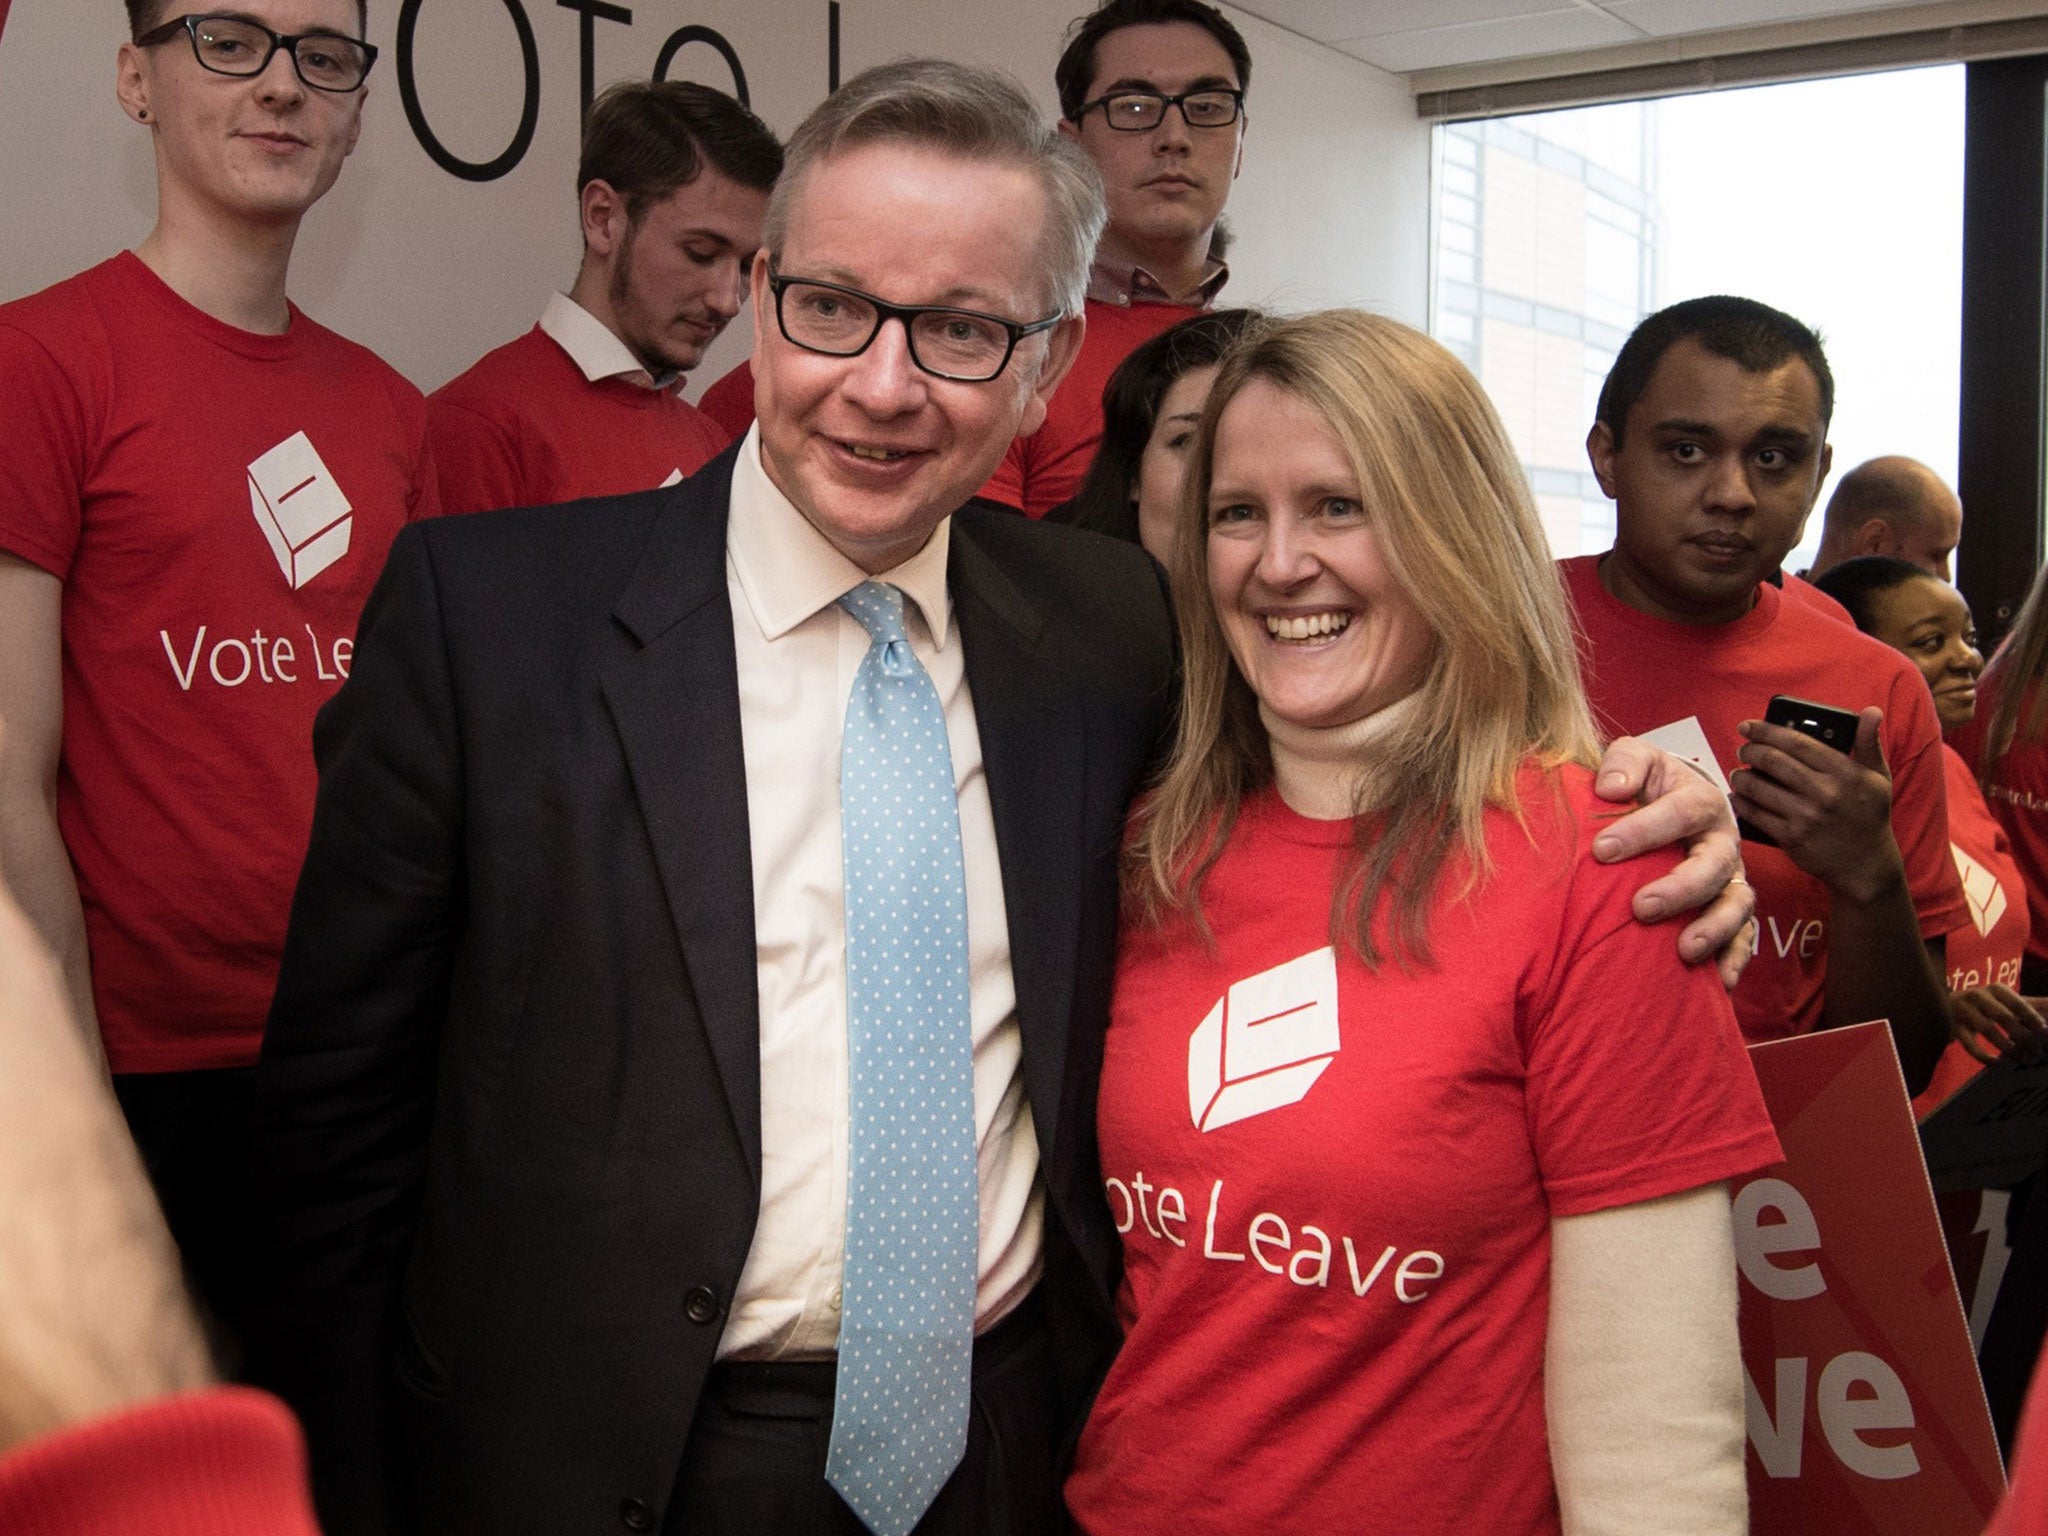 Michael Gove with Vote Leave activists at the event in London